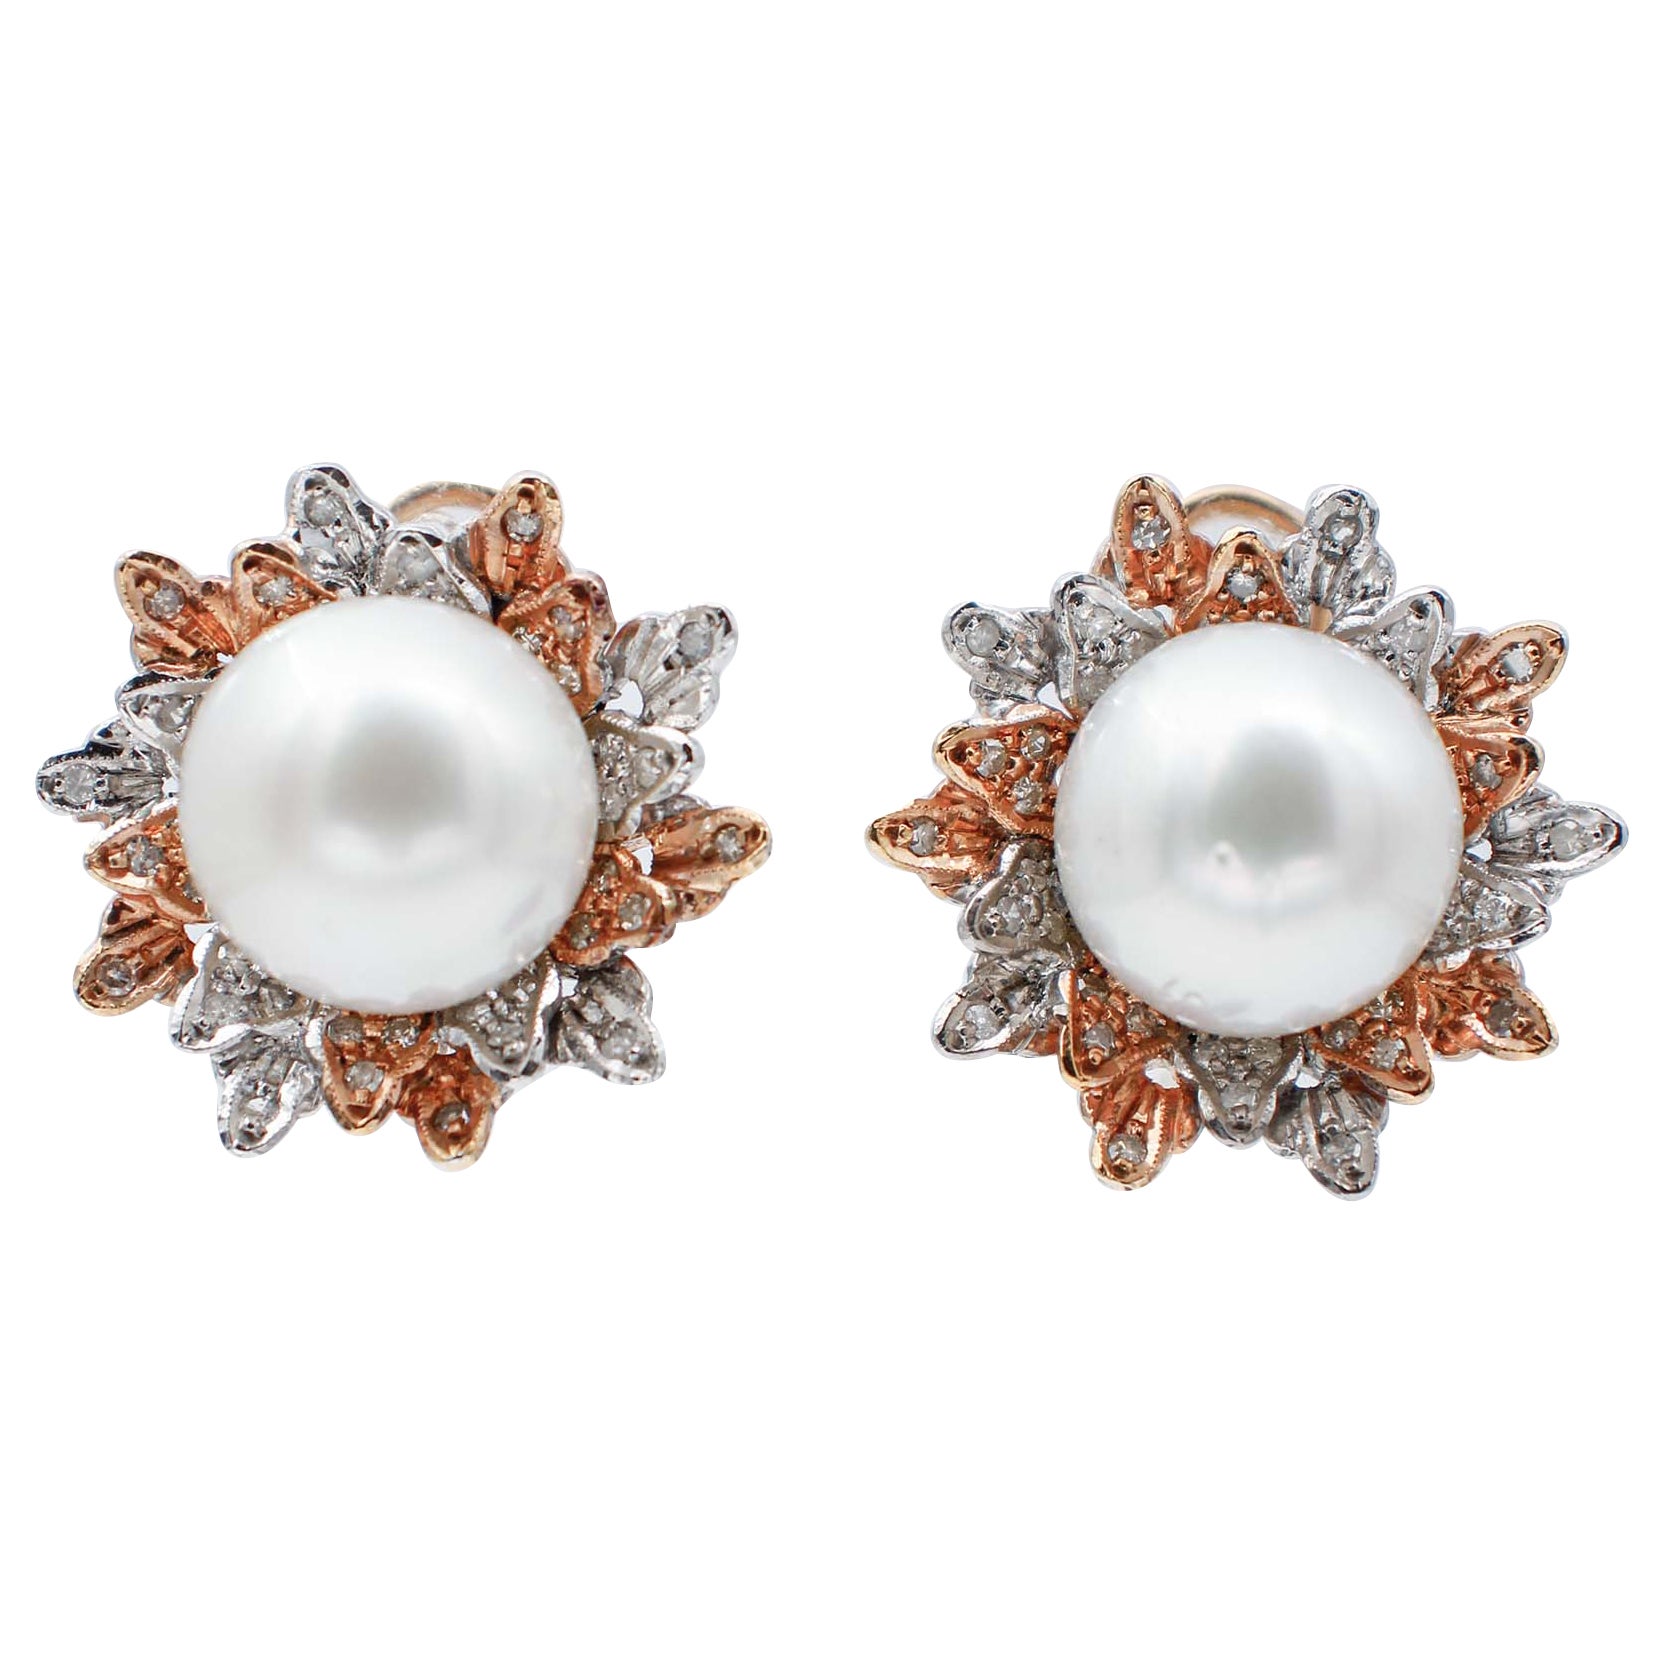 South-Sea Pearls, Diamonds, 14 Karat White and Rose Gold Stud Earrings For Sale